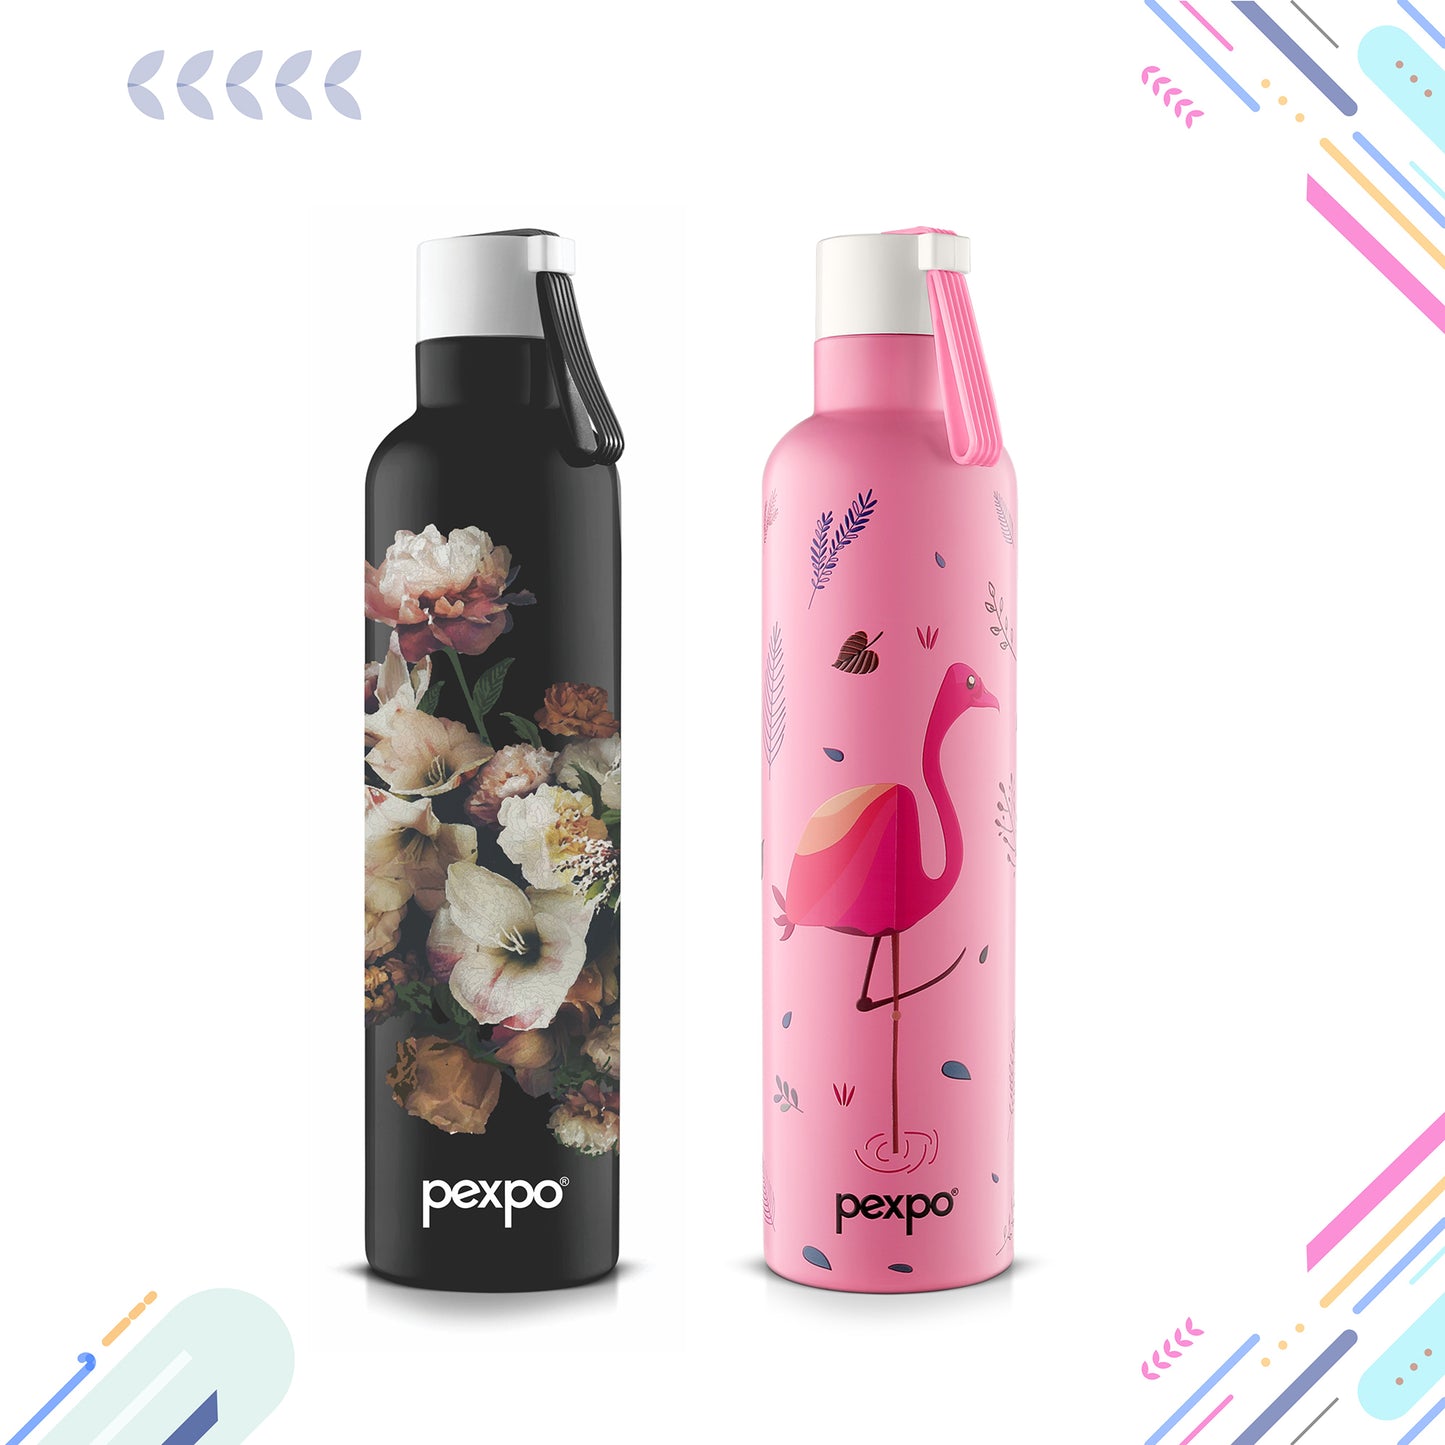 Combo-Oslo Black Floral 750ml (Vacuum Insulated Bottle) and Oslo Pink Flamingo Design 750ml(Vacuum Insulated Bottle)